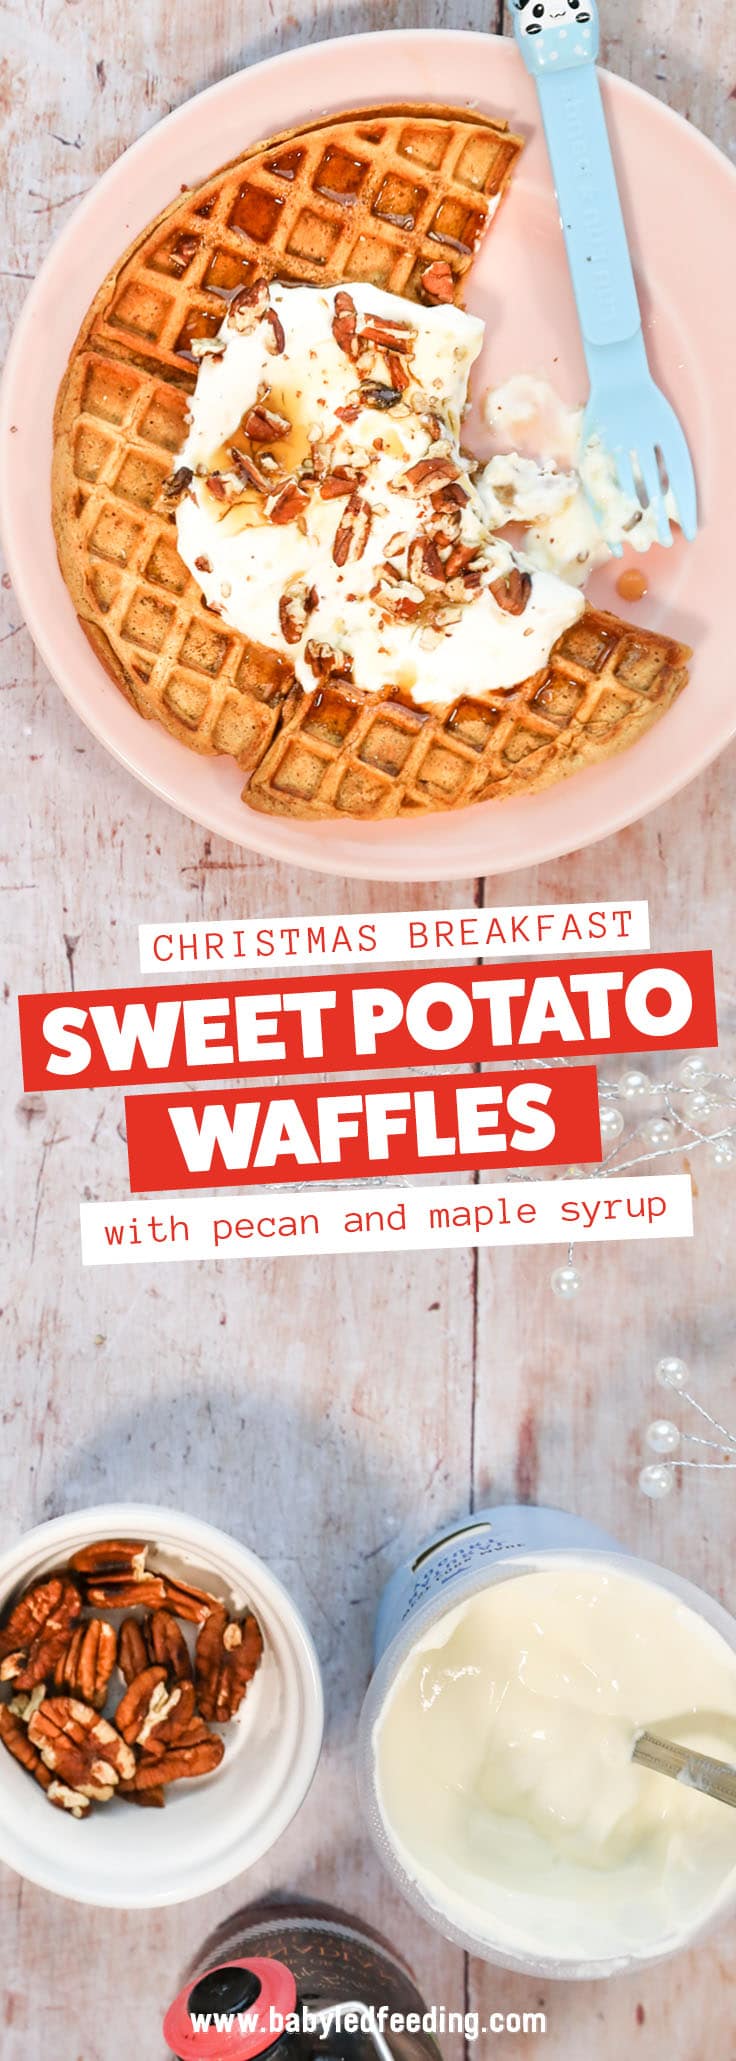 Easy and Healthy Sweet Potato Waffles with Crushed Pecans! Refined sugar free, baby led weaning friendly, family breakfast spiced with cinnamon, ginger, and ground nutmeg served with a dollop of protein rich Greek yogurt. #waffles #babyledfeeding #babyledweaning #sweetpotato #breakfast